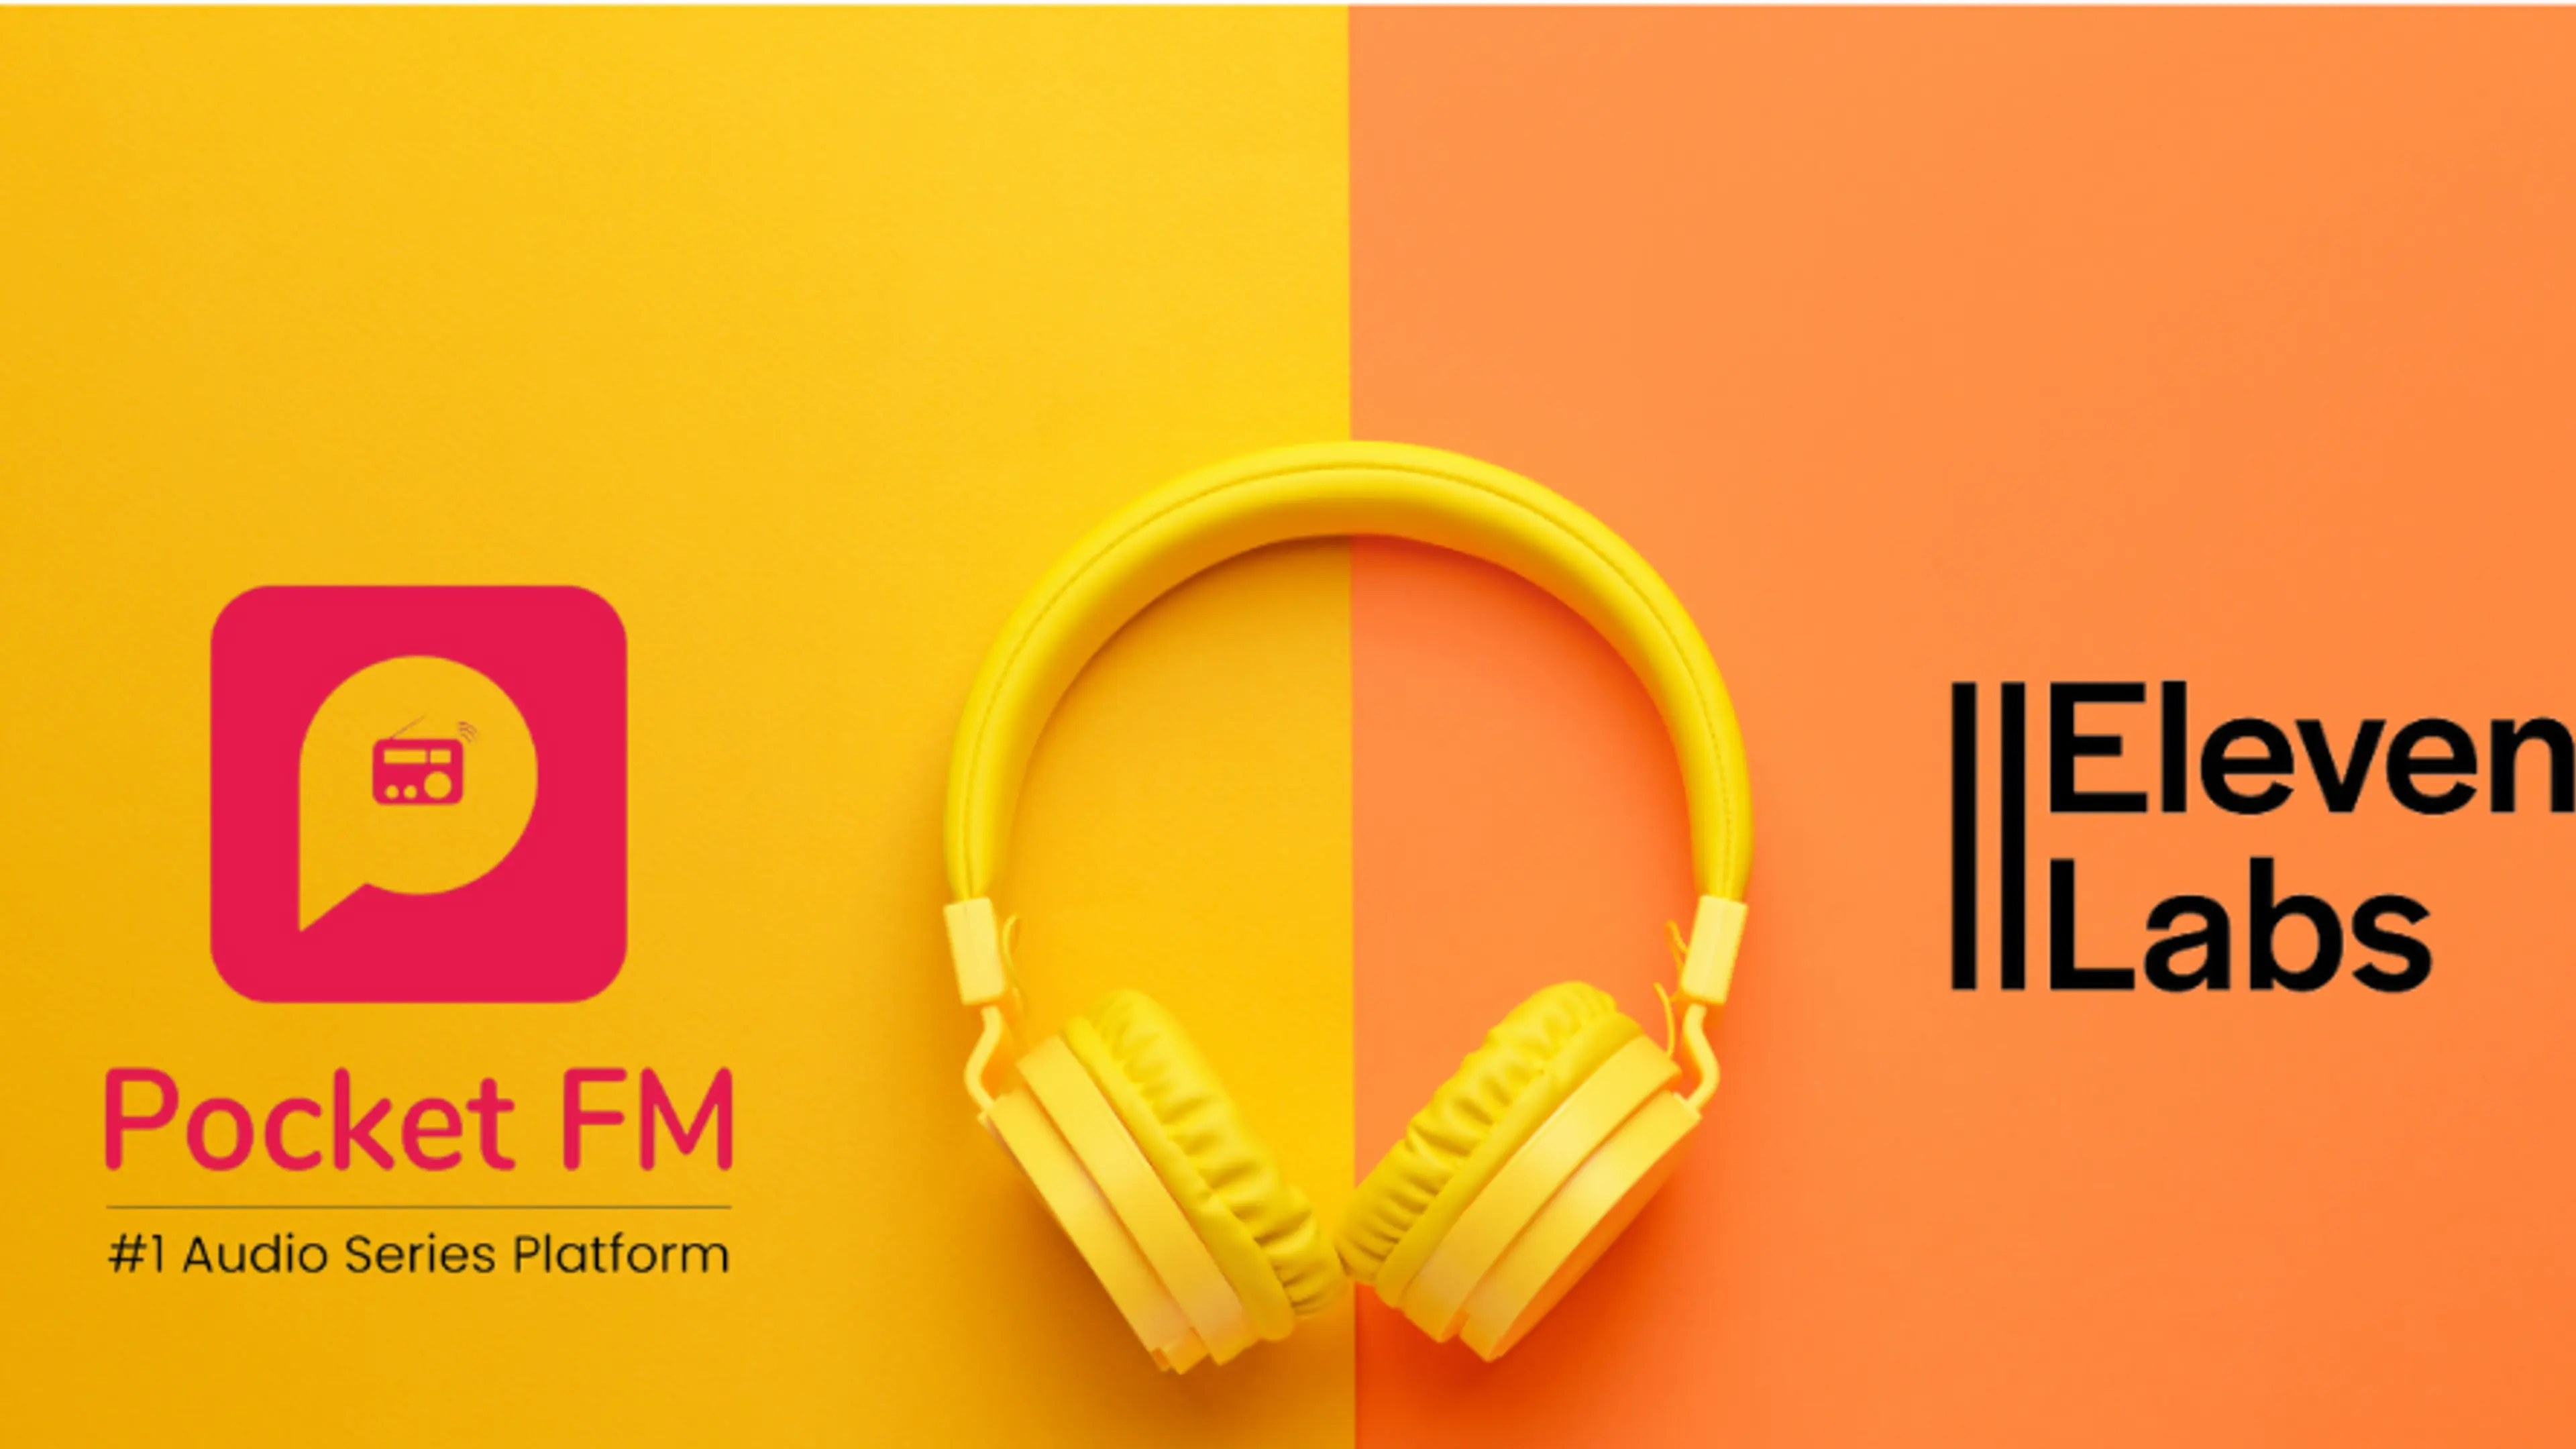 Pocket FM Teams Up with ElevenLabs to Launch Advanced AI Audio Series